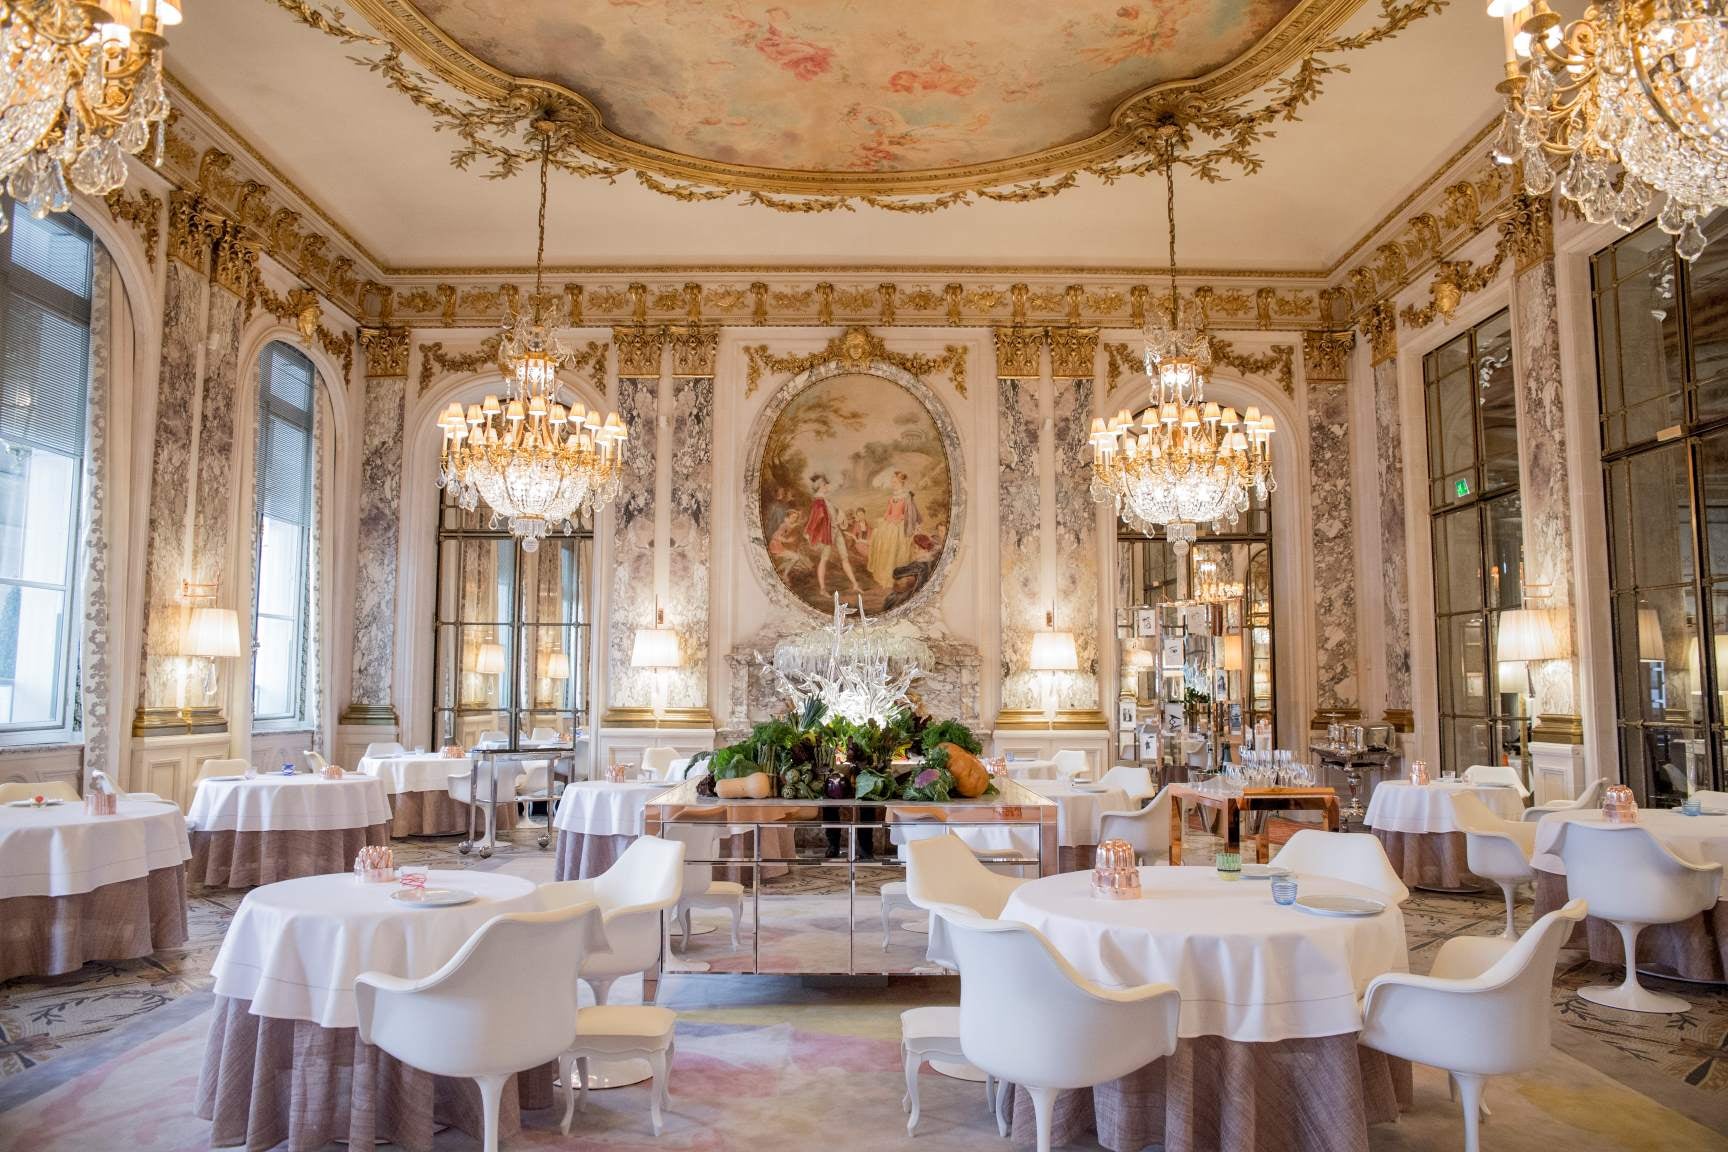 Image showing the dining room of Le Meurice with gold detailing and crystal decorations